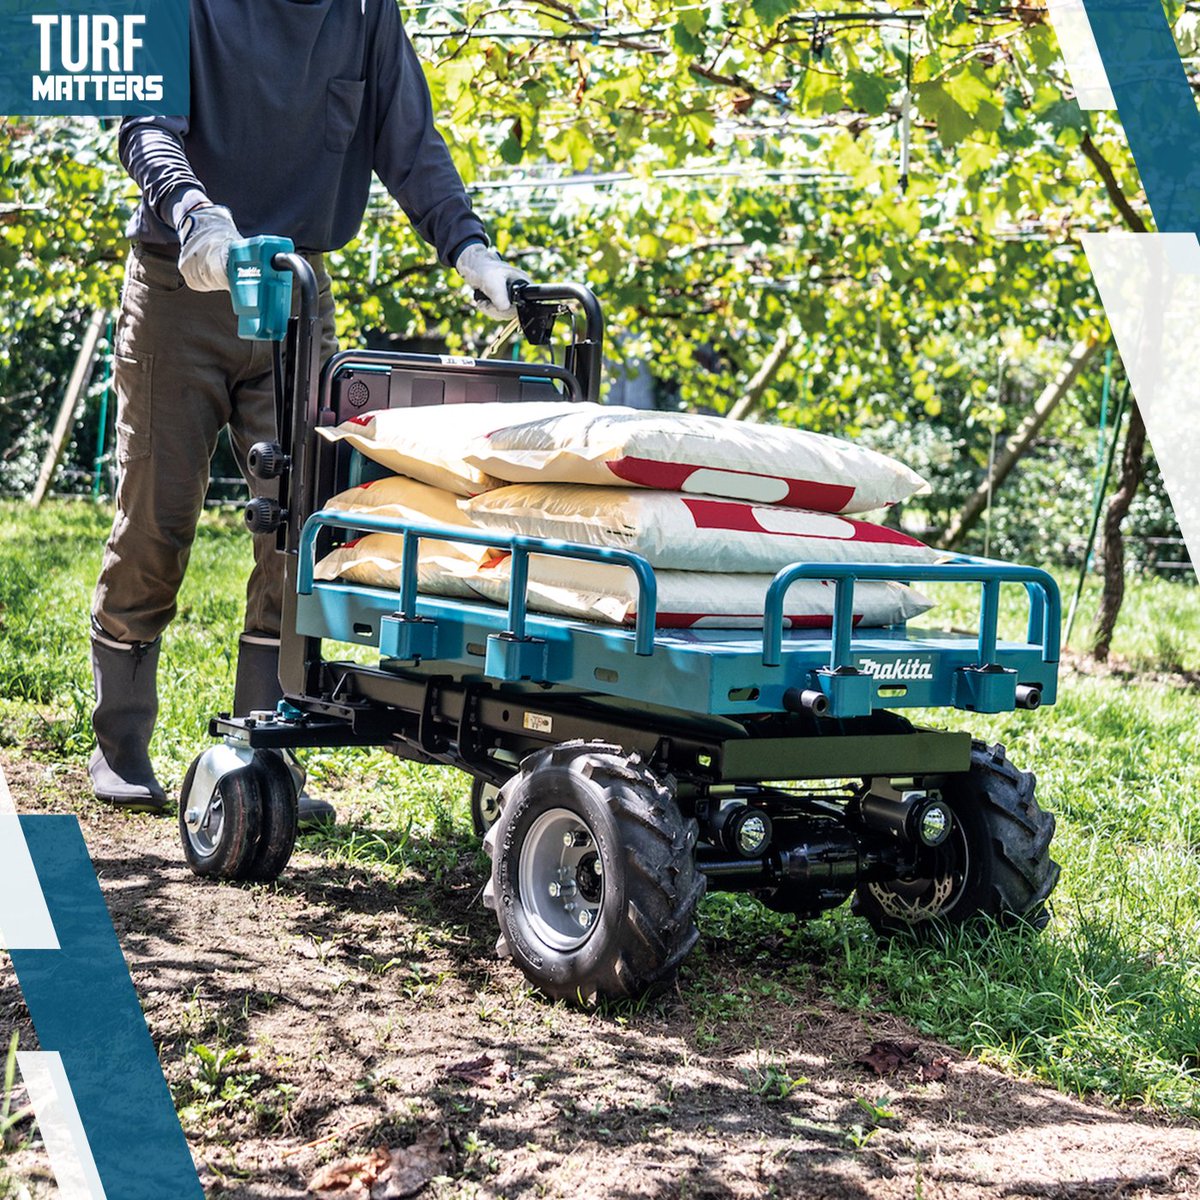 #TurfNews Power tool manufacturer @MakitaUK has added a new battery powered wheelbarrow to its extensive LXT outdoor power equipment range. The DCU601 is equipped with an electric lift for even easier loading and unloading. Read more 👉 turfmatters.co.uk/easy-transport…